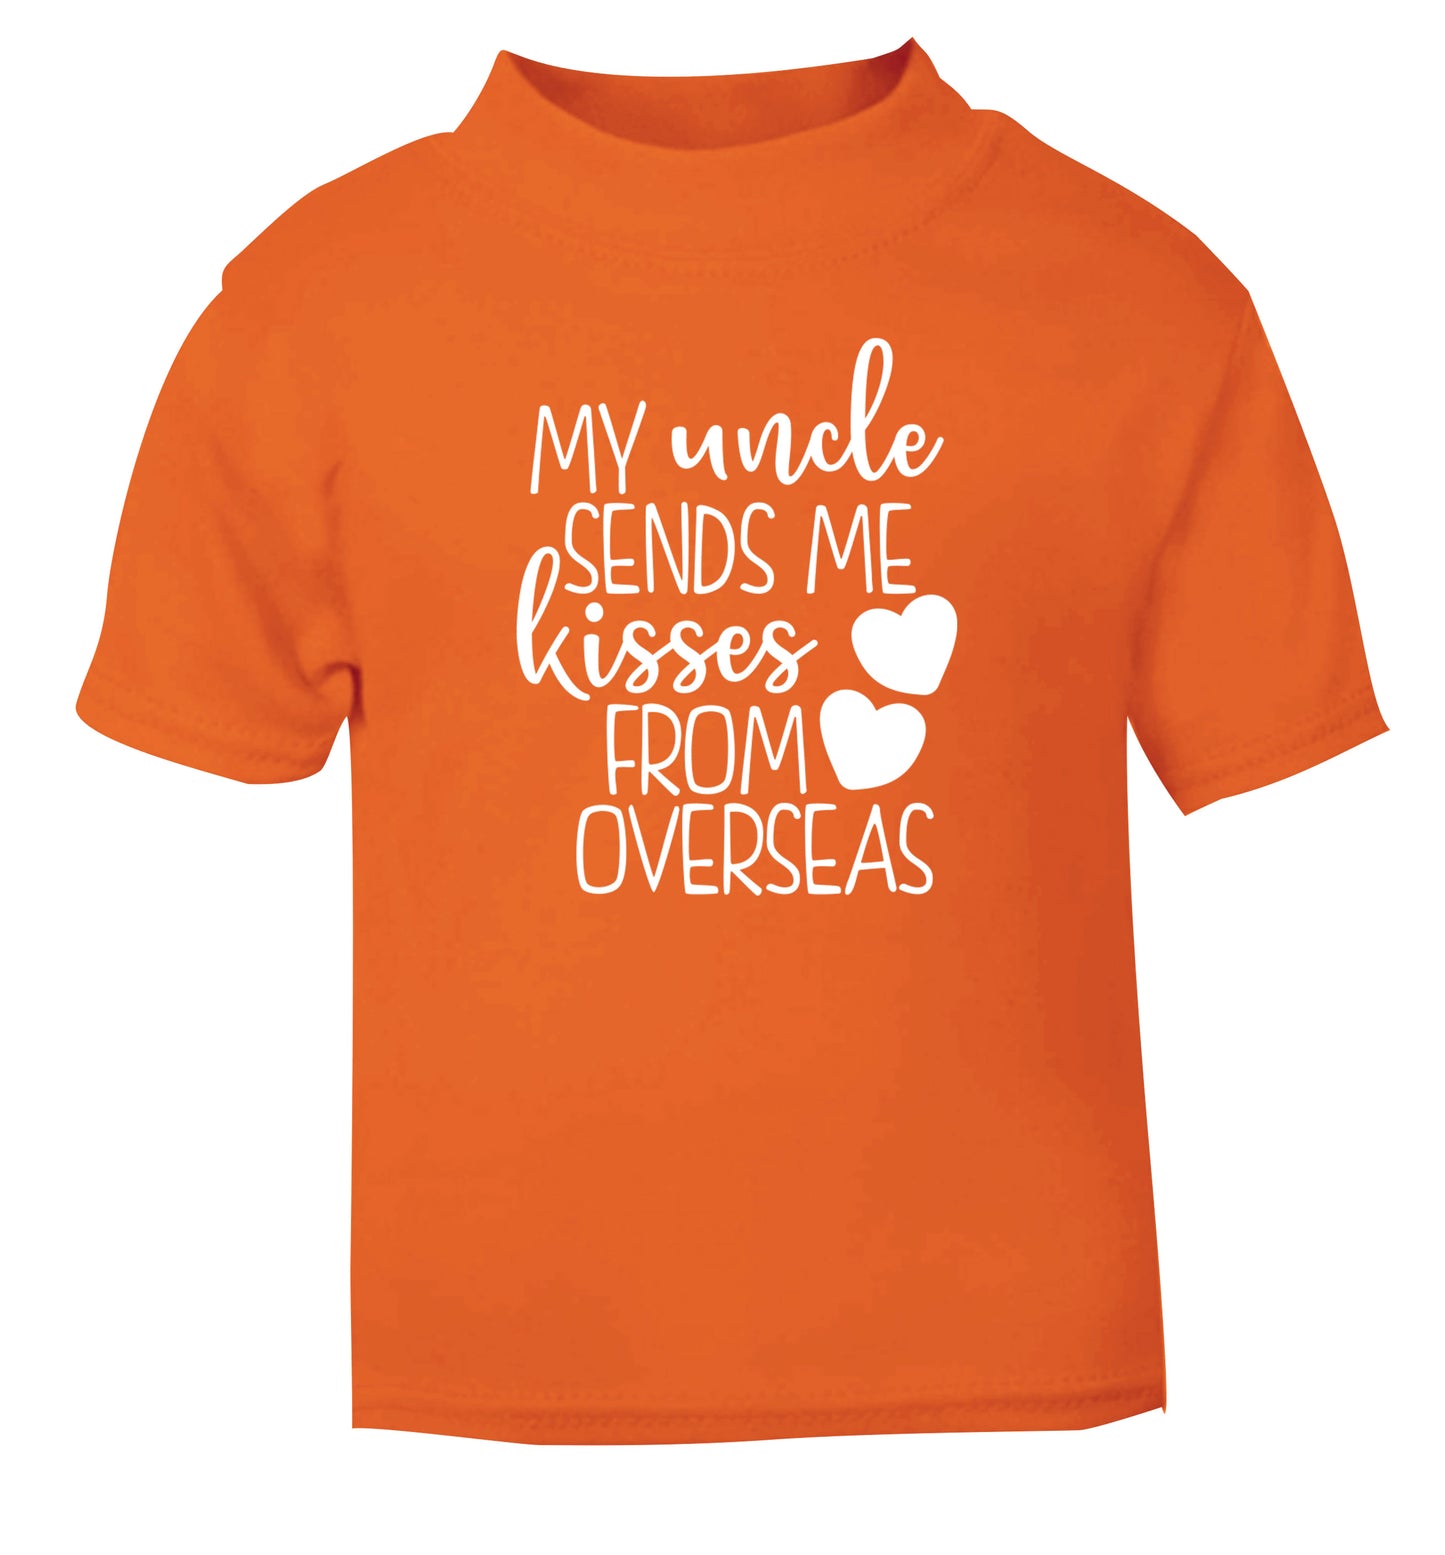 My uncle sends me kisses from overseas orange Baby Toddler Tshirt 2 Years